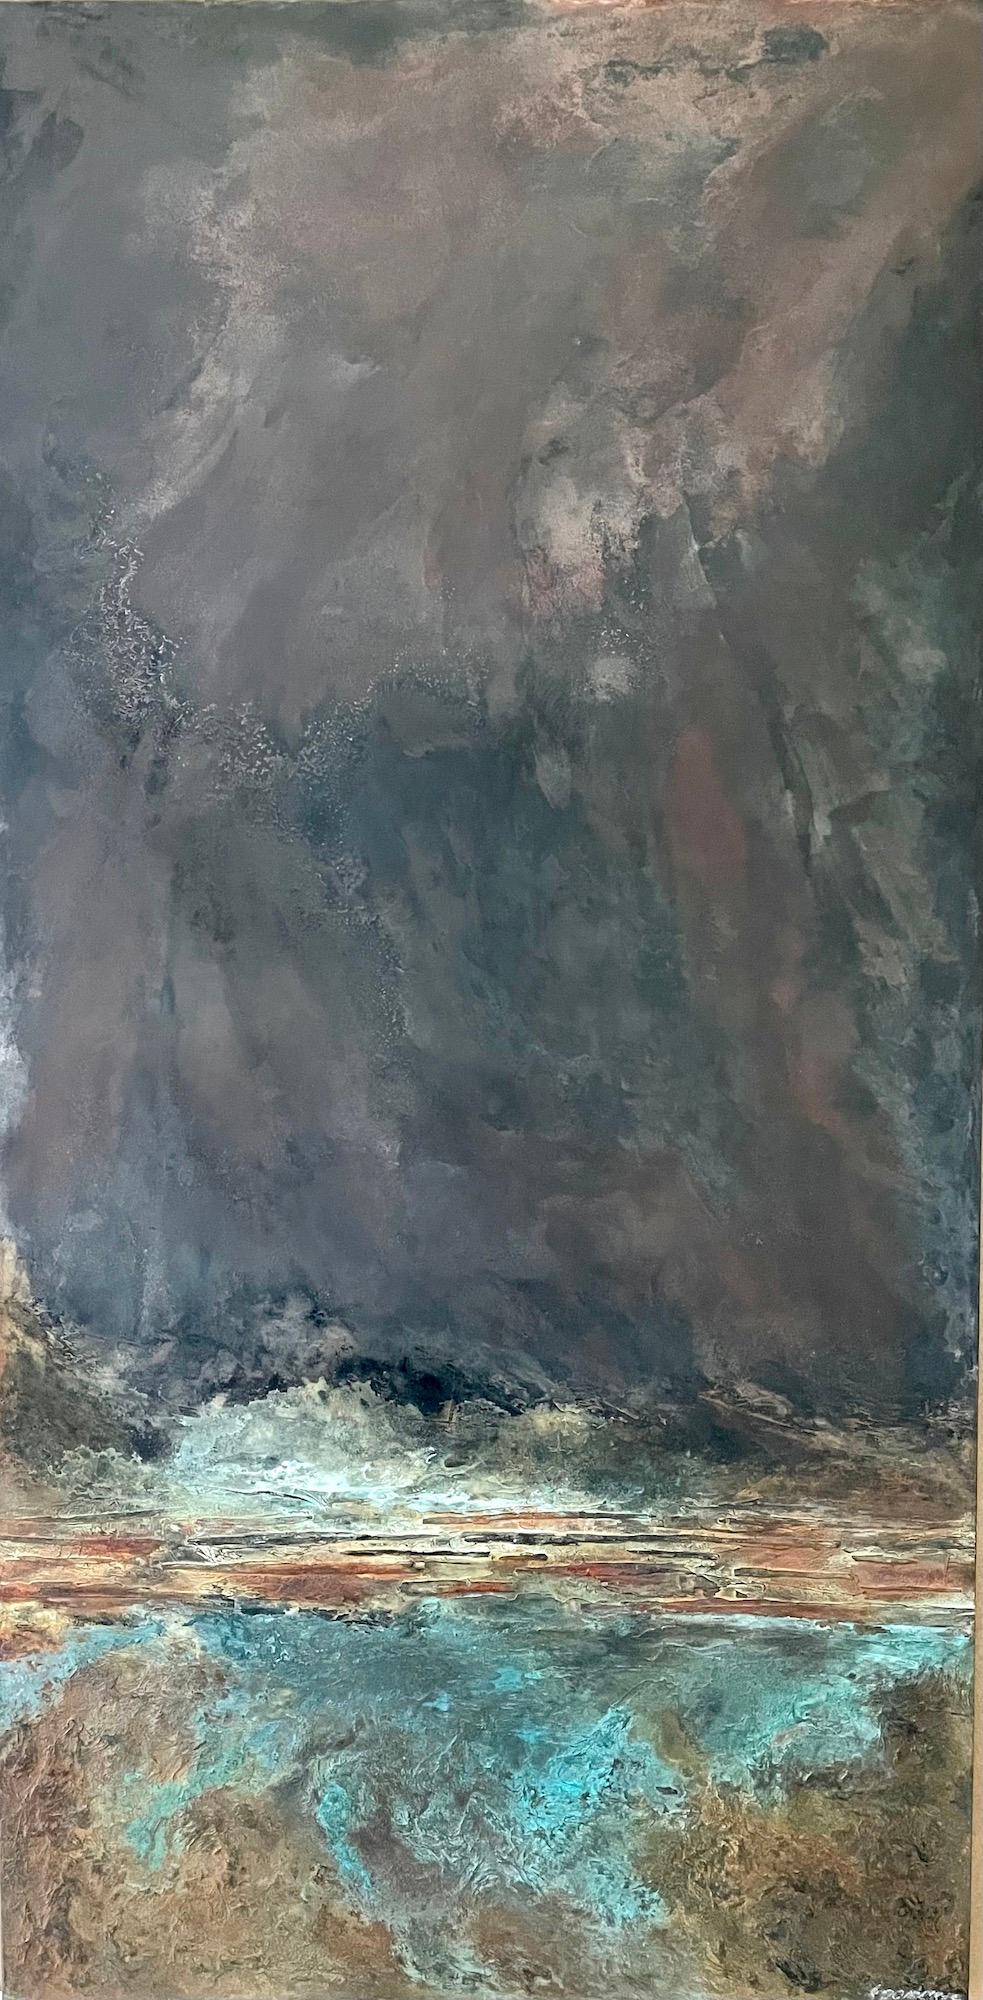 Infinity II is a unique painting by French contemporary artist Frédérique Domergue. This painting is made with oxidized zinc and bronze leaves on aluminium panel, patina fixed with beeswax, dimensions are 200 × 100 cm (78.7 × 39.4 in).
The artwork